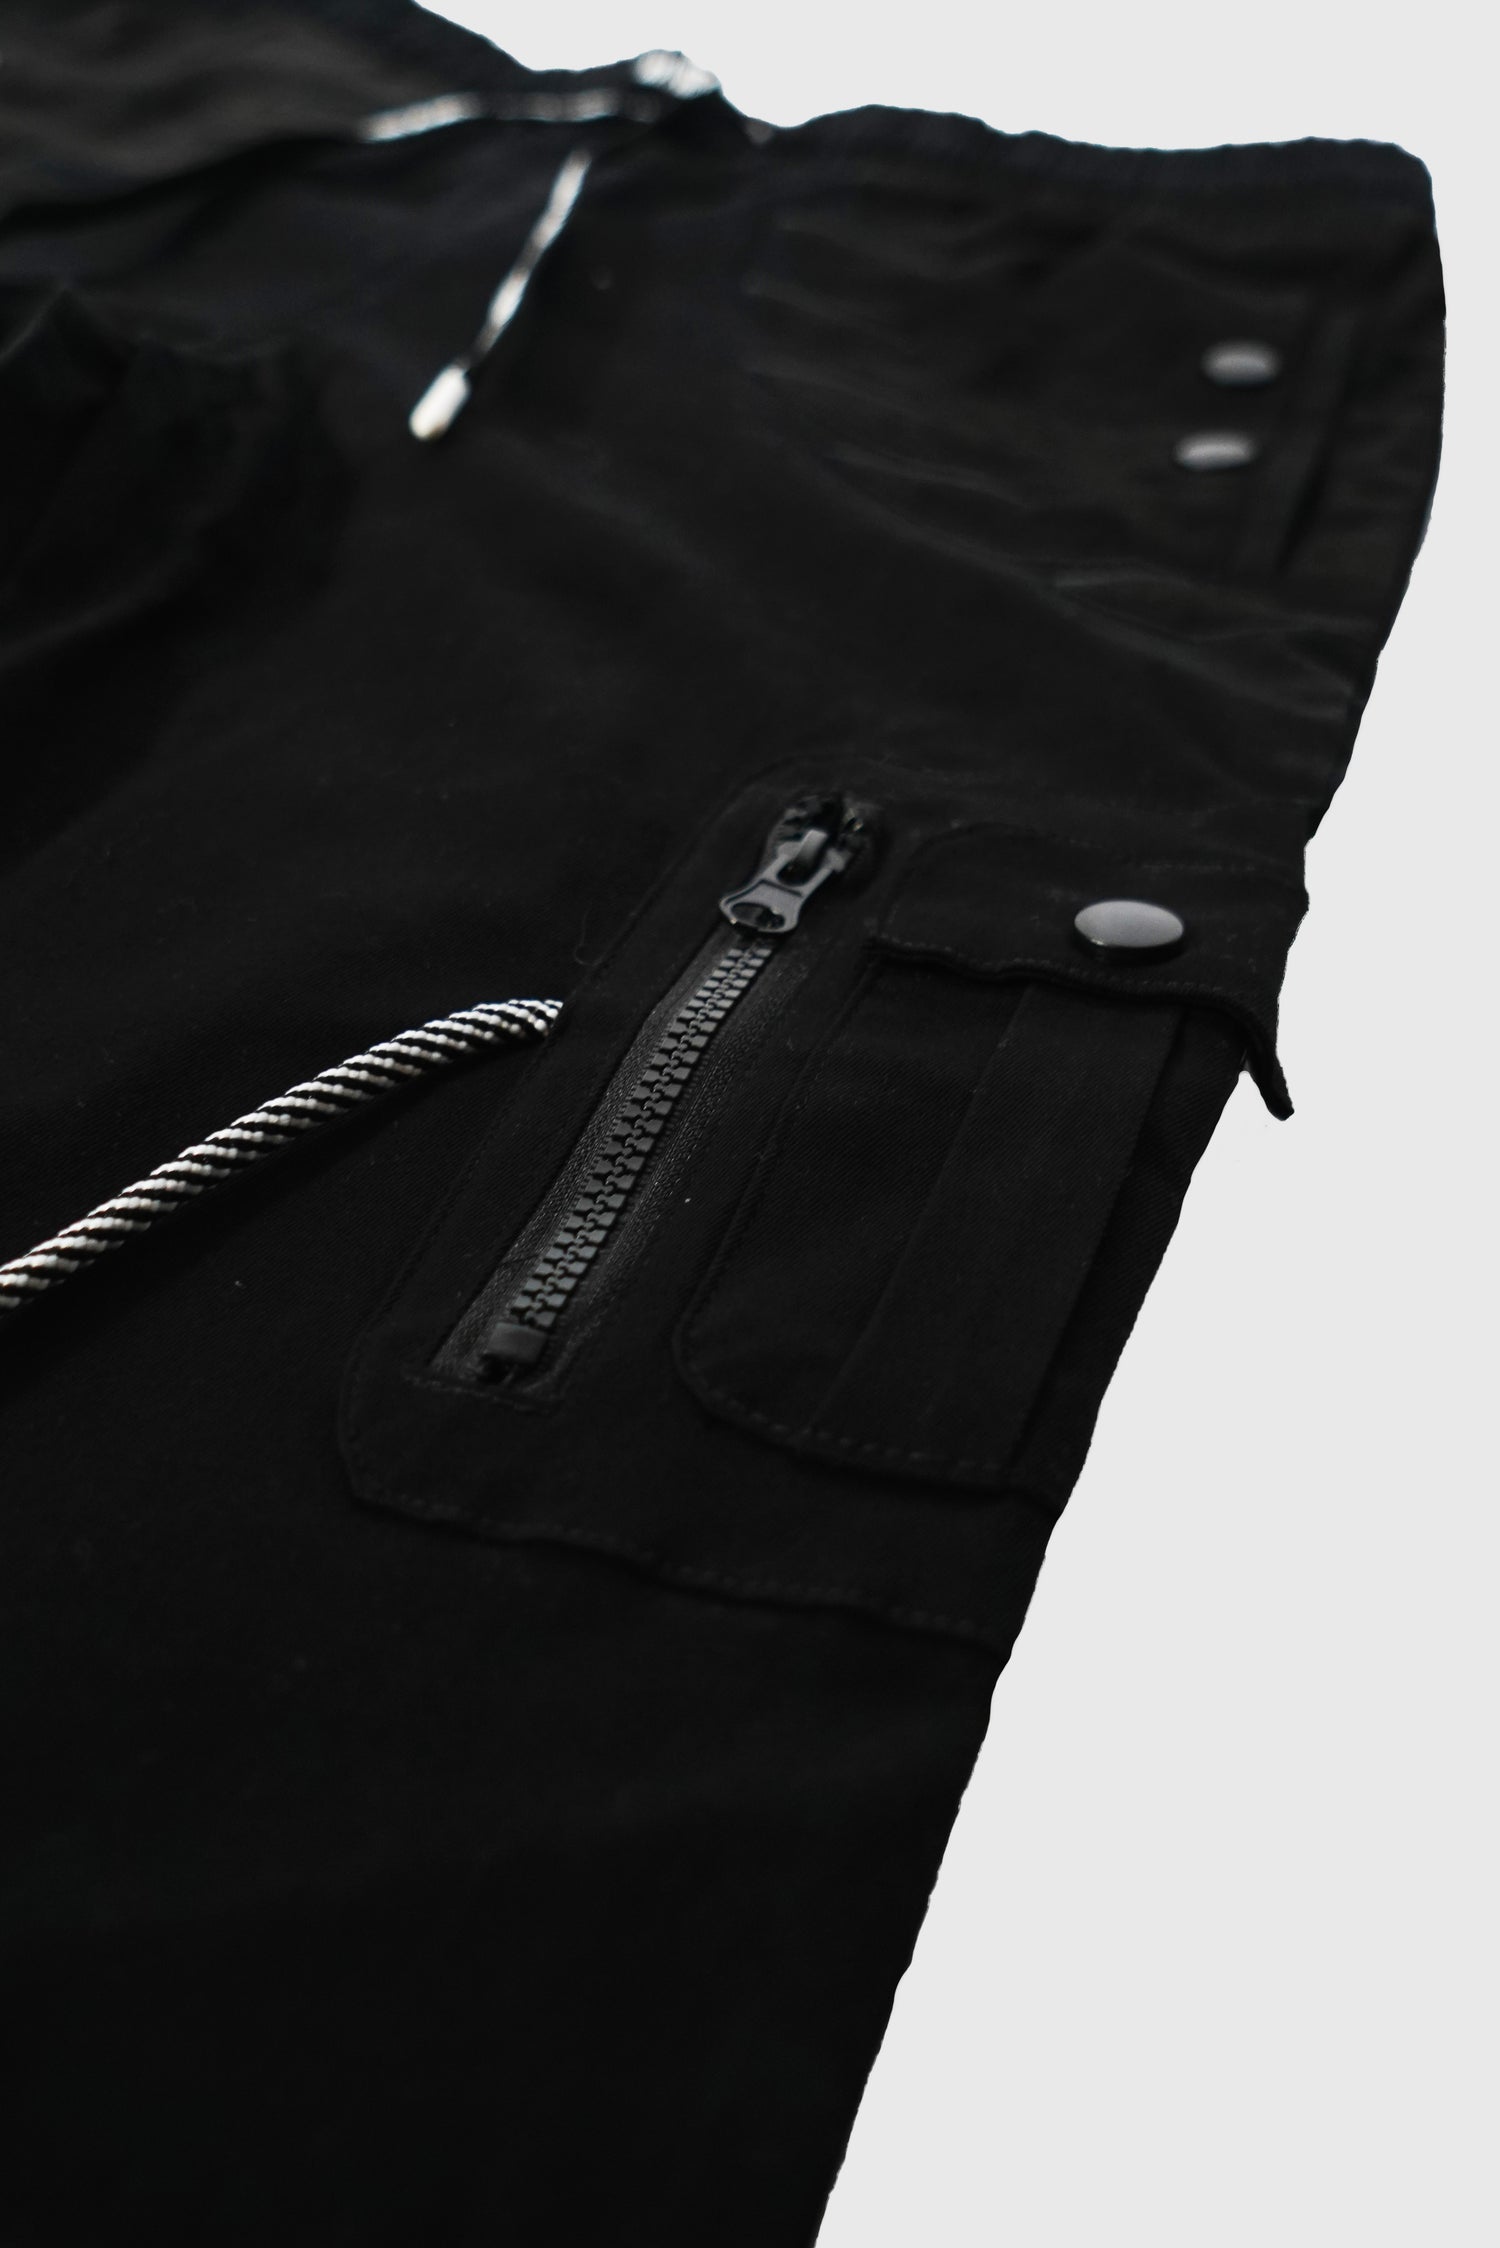 Blossom Cargo Joggers Pants - The Hideout Clothing